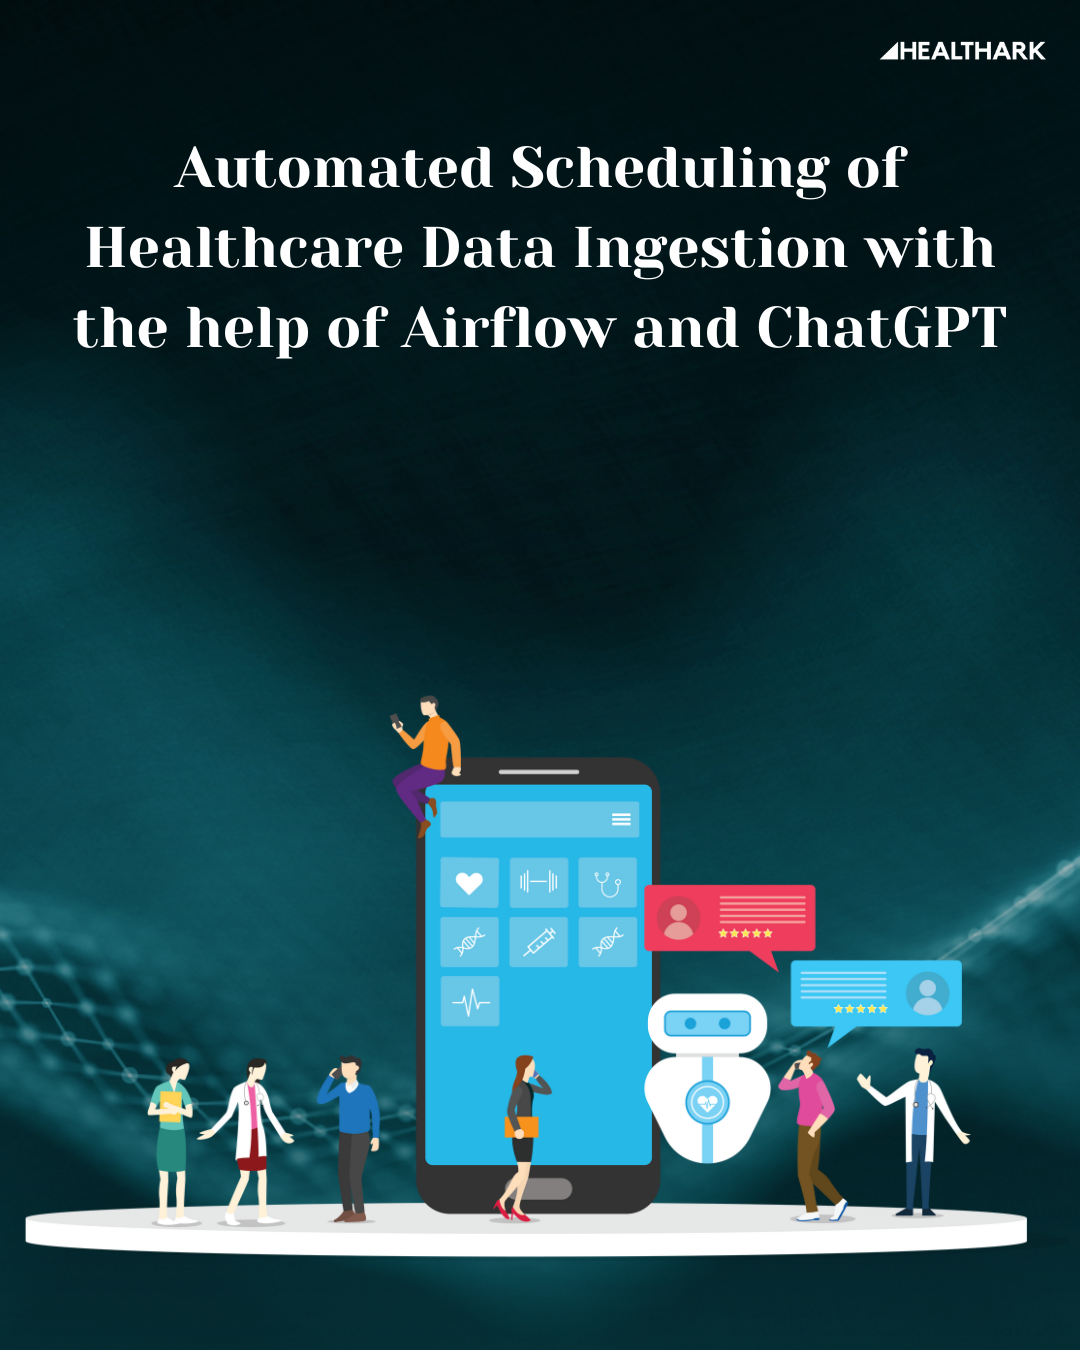 Automated Scheduling of Healthcare Data Ingestion with the help of Airflow and ChatGPT